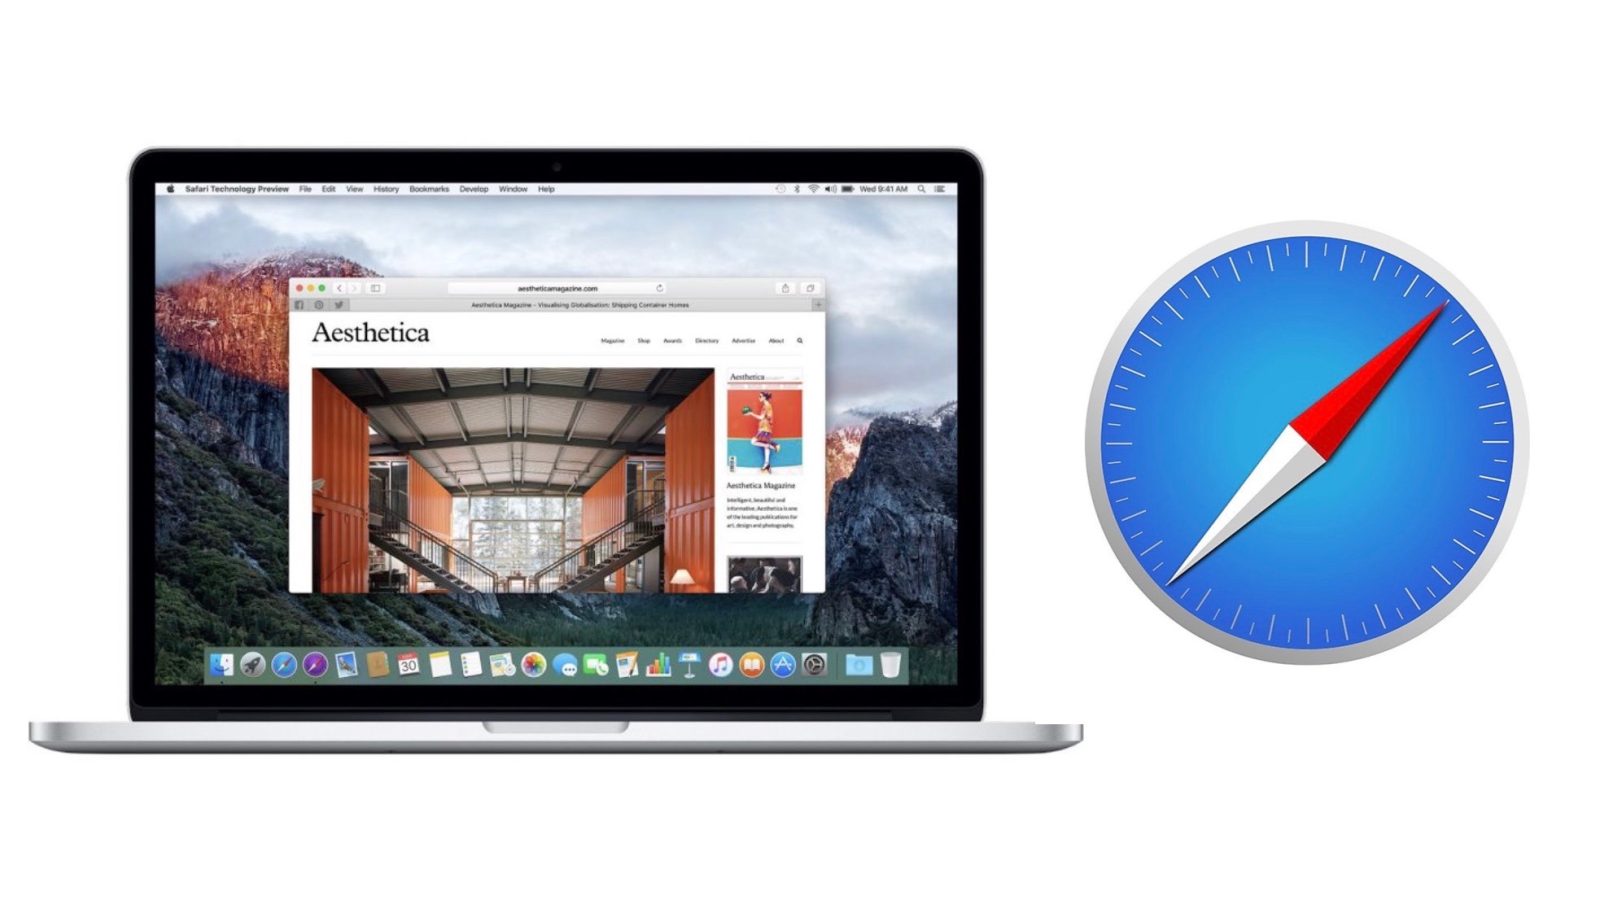 Safari 11 Now Available for macOS Sierra and OS X El Capitan